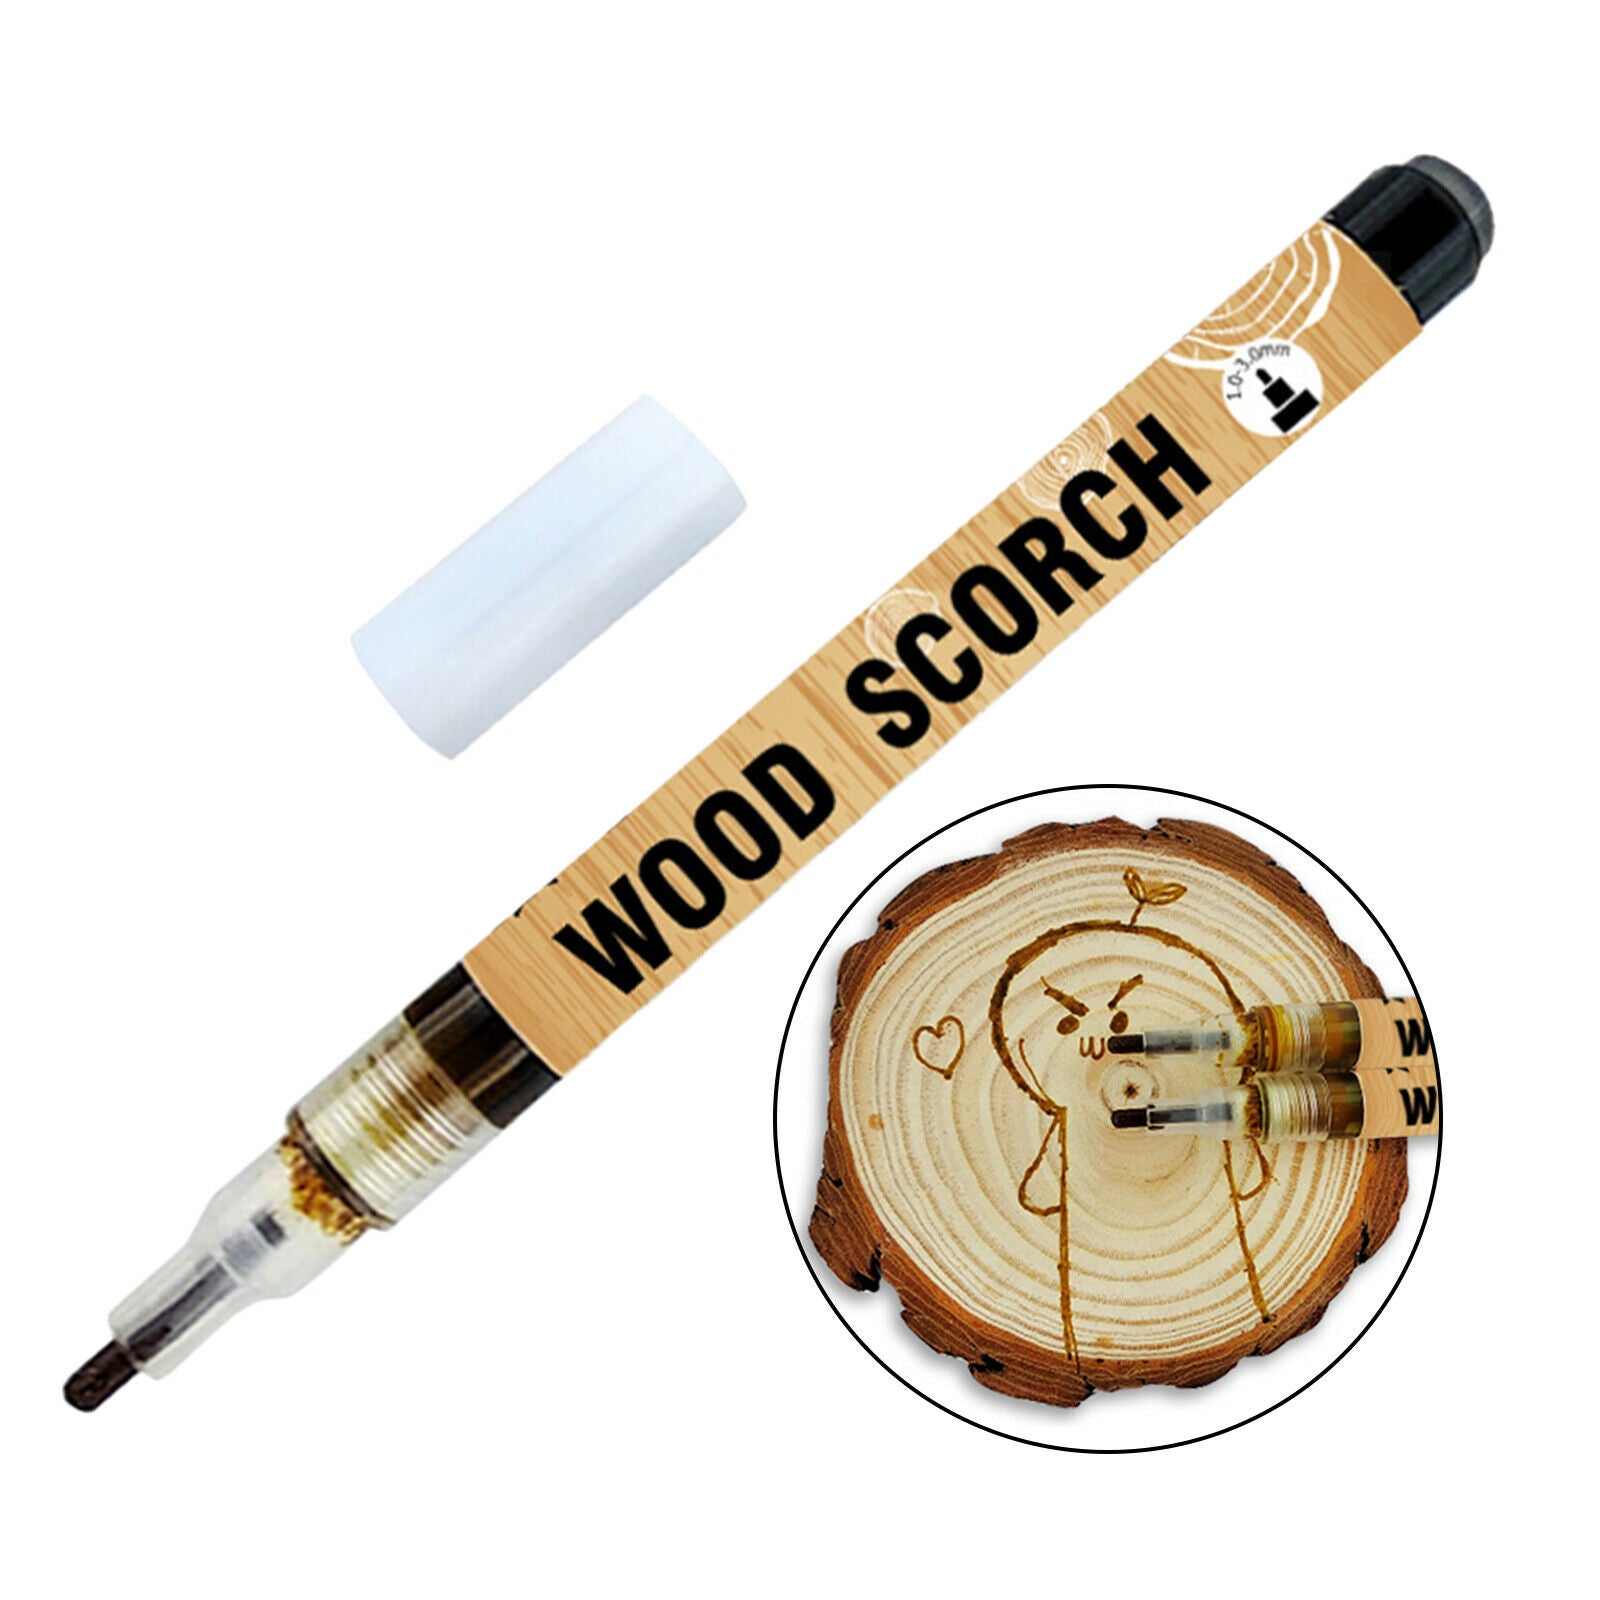 Pyrography Caramel Scorch Marker Safety Wood Burning Pen Woodworking Pens